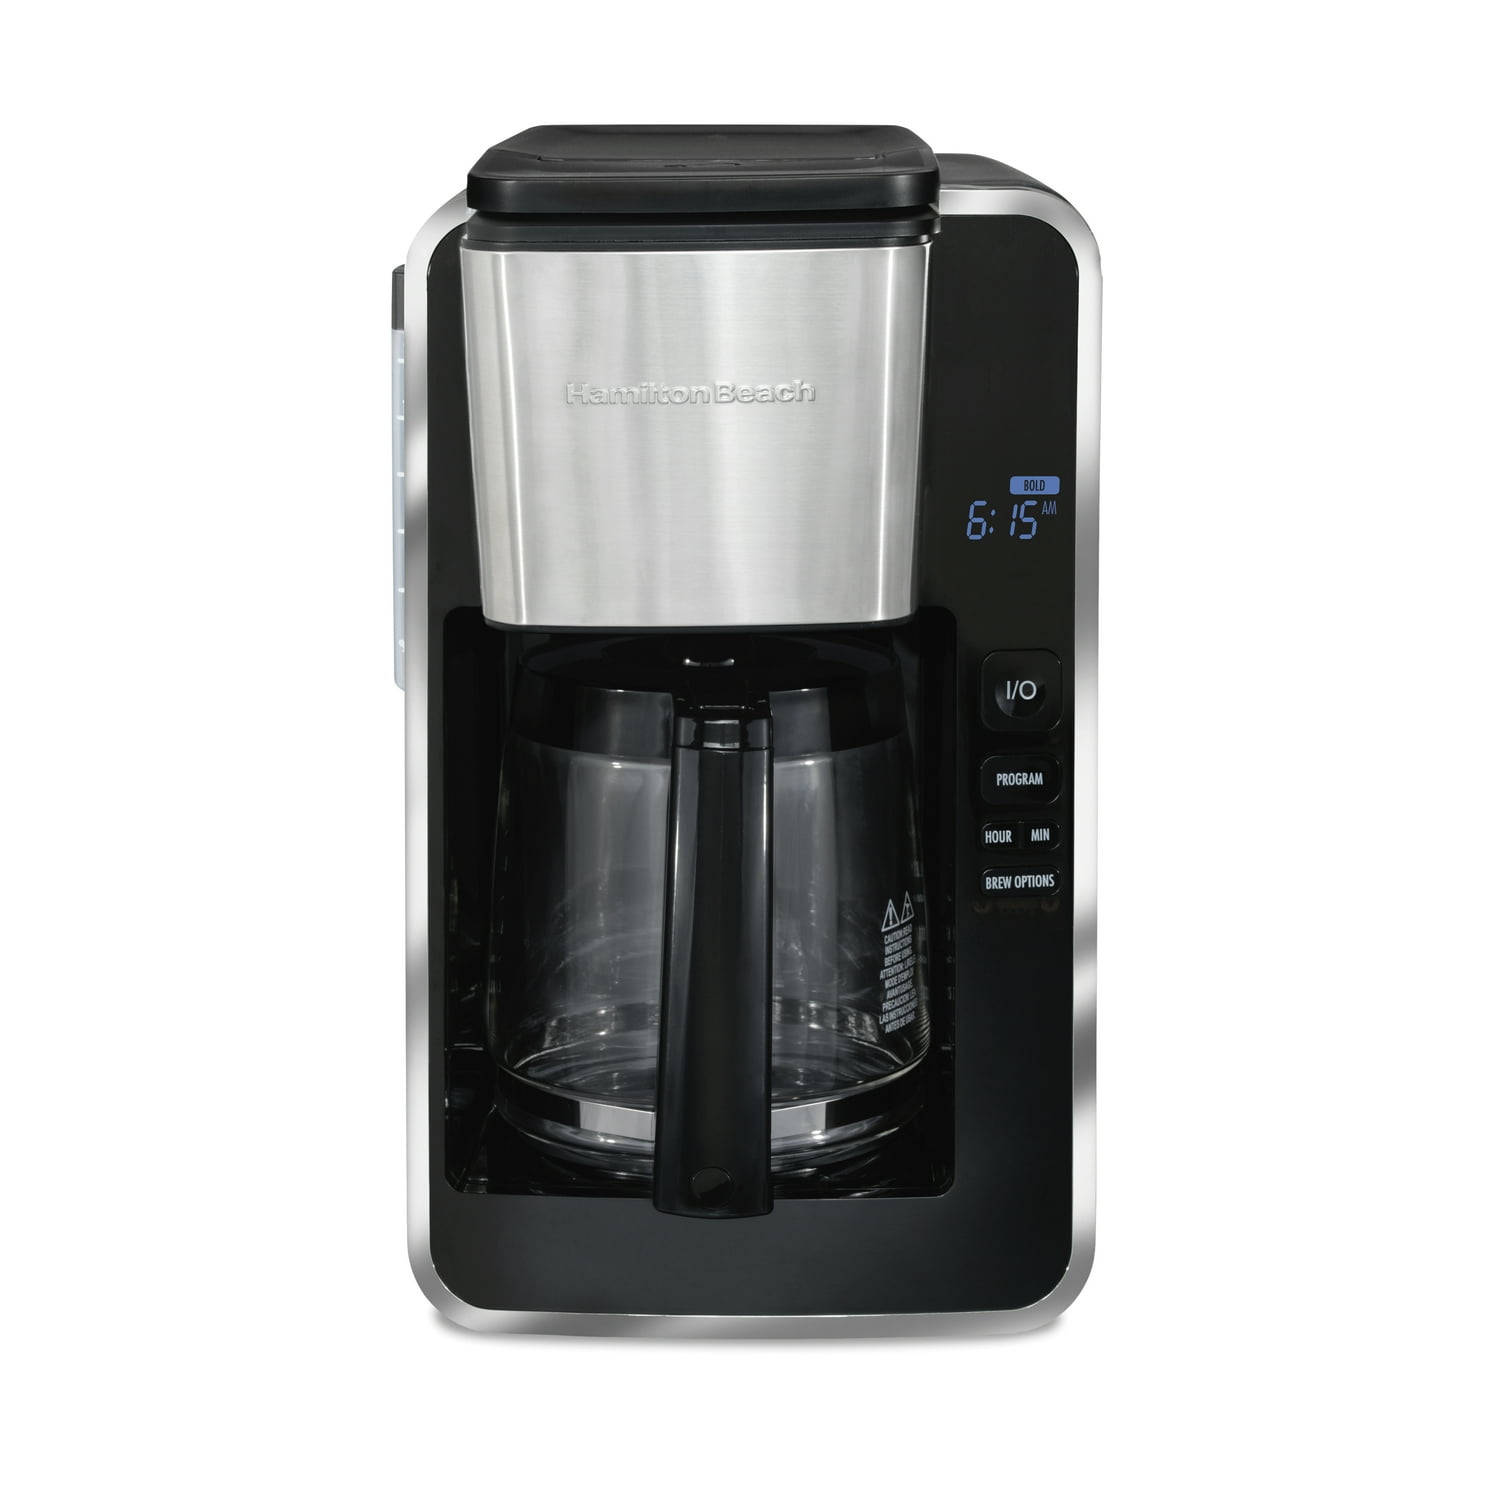 12-Cup Hamilton Beach Front Fill Deluxe Programmable Coffee Maker $17.02  + Free S&H w/ Walmart+ or $35+